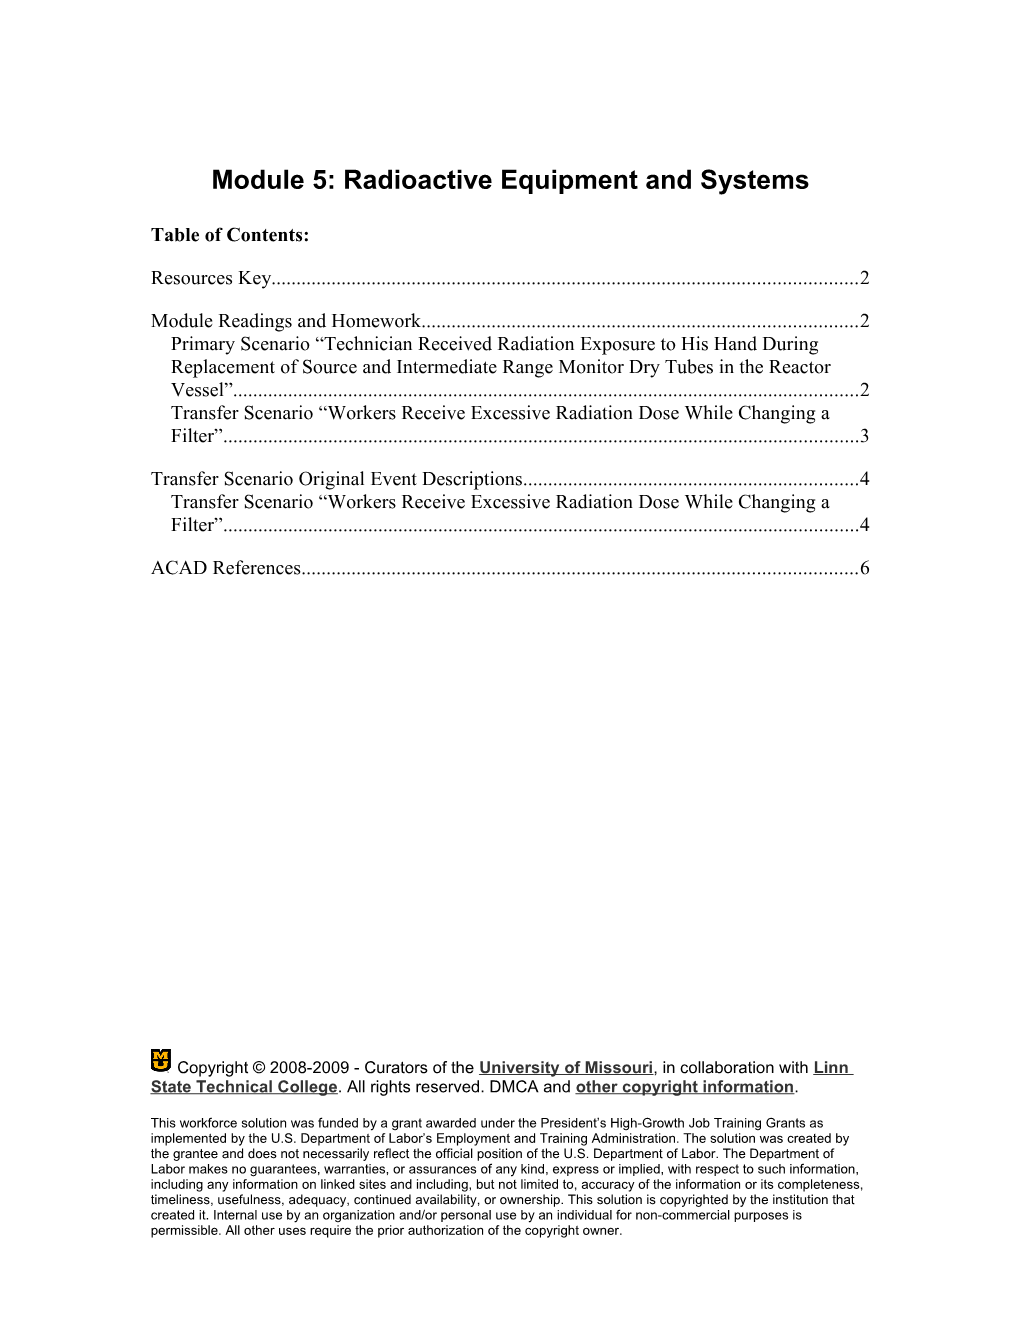 Module 5:Radioactive Equipment and Systems